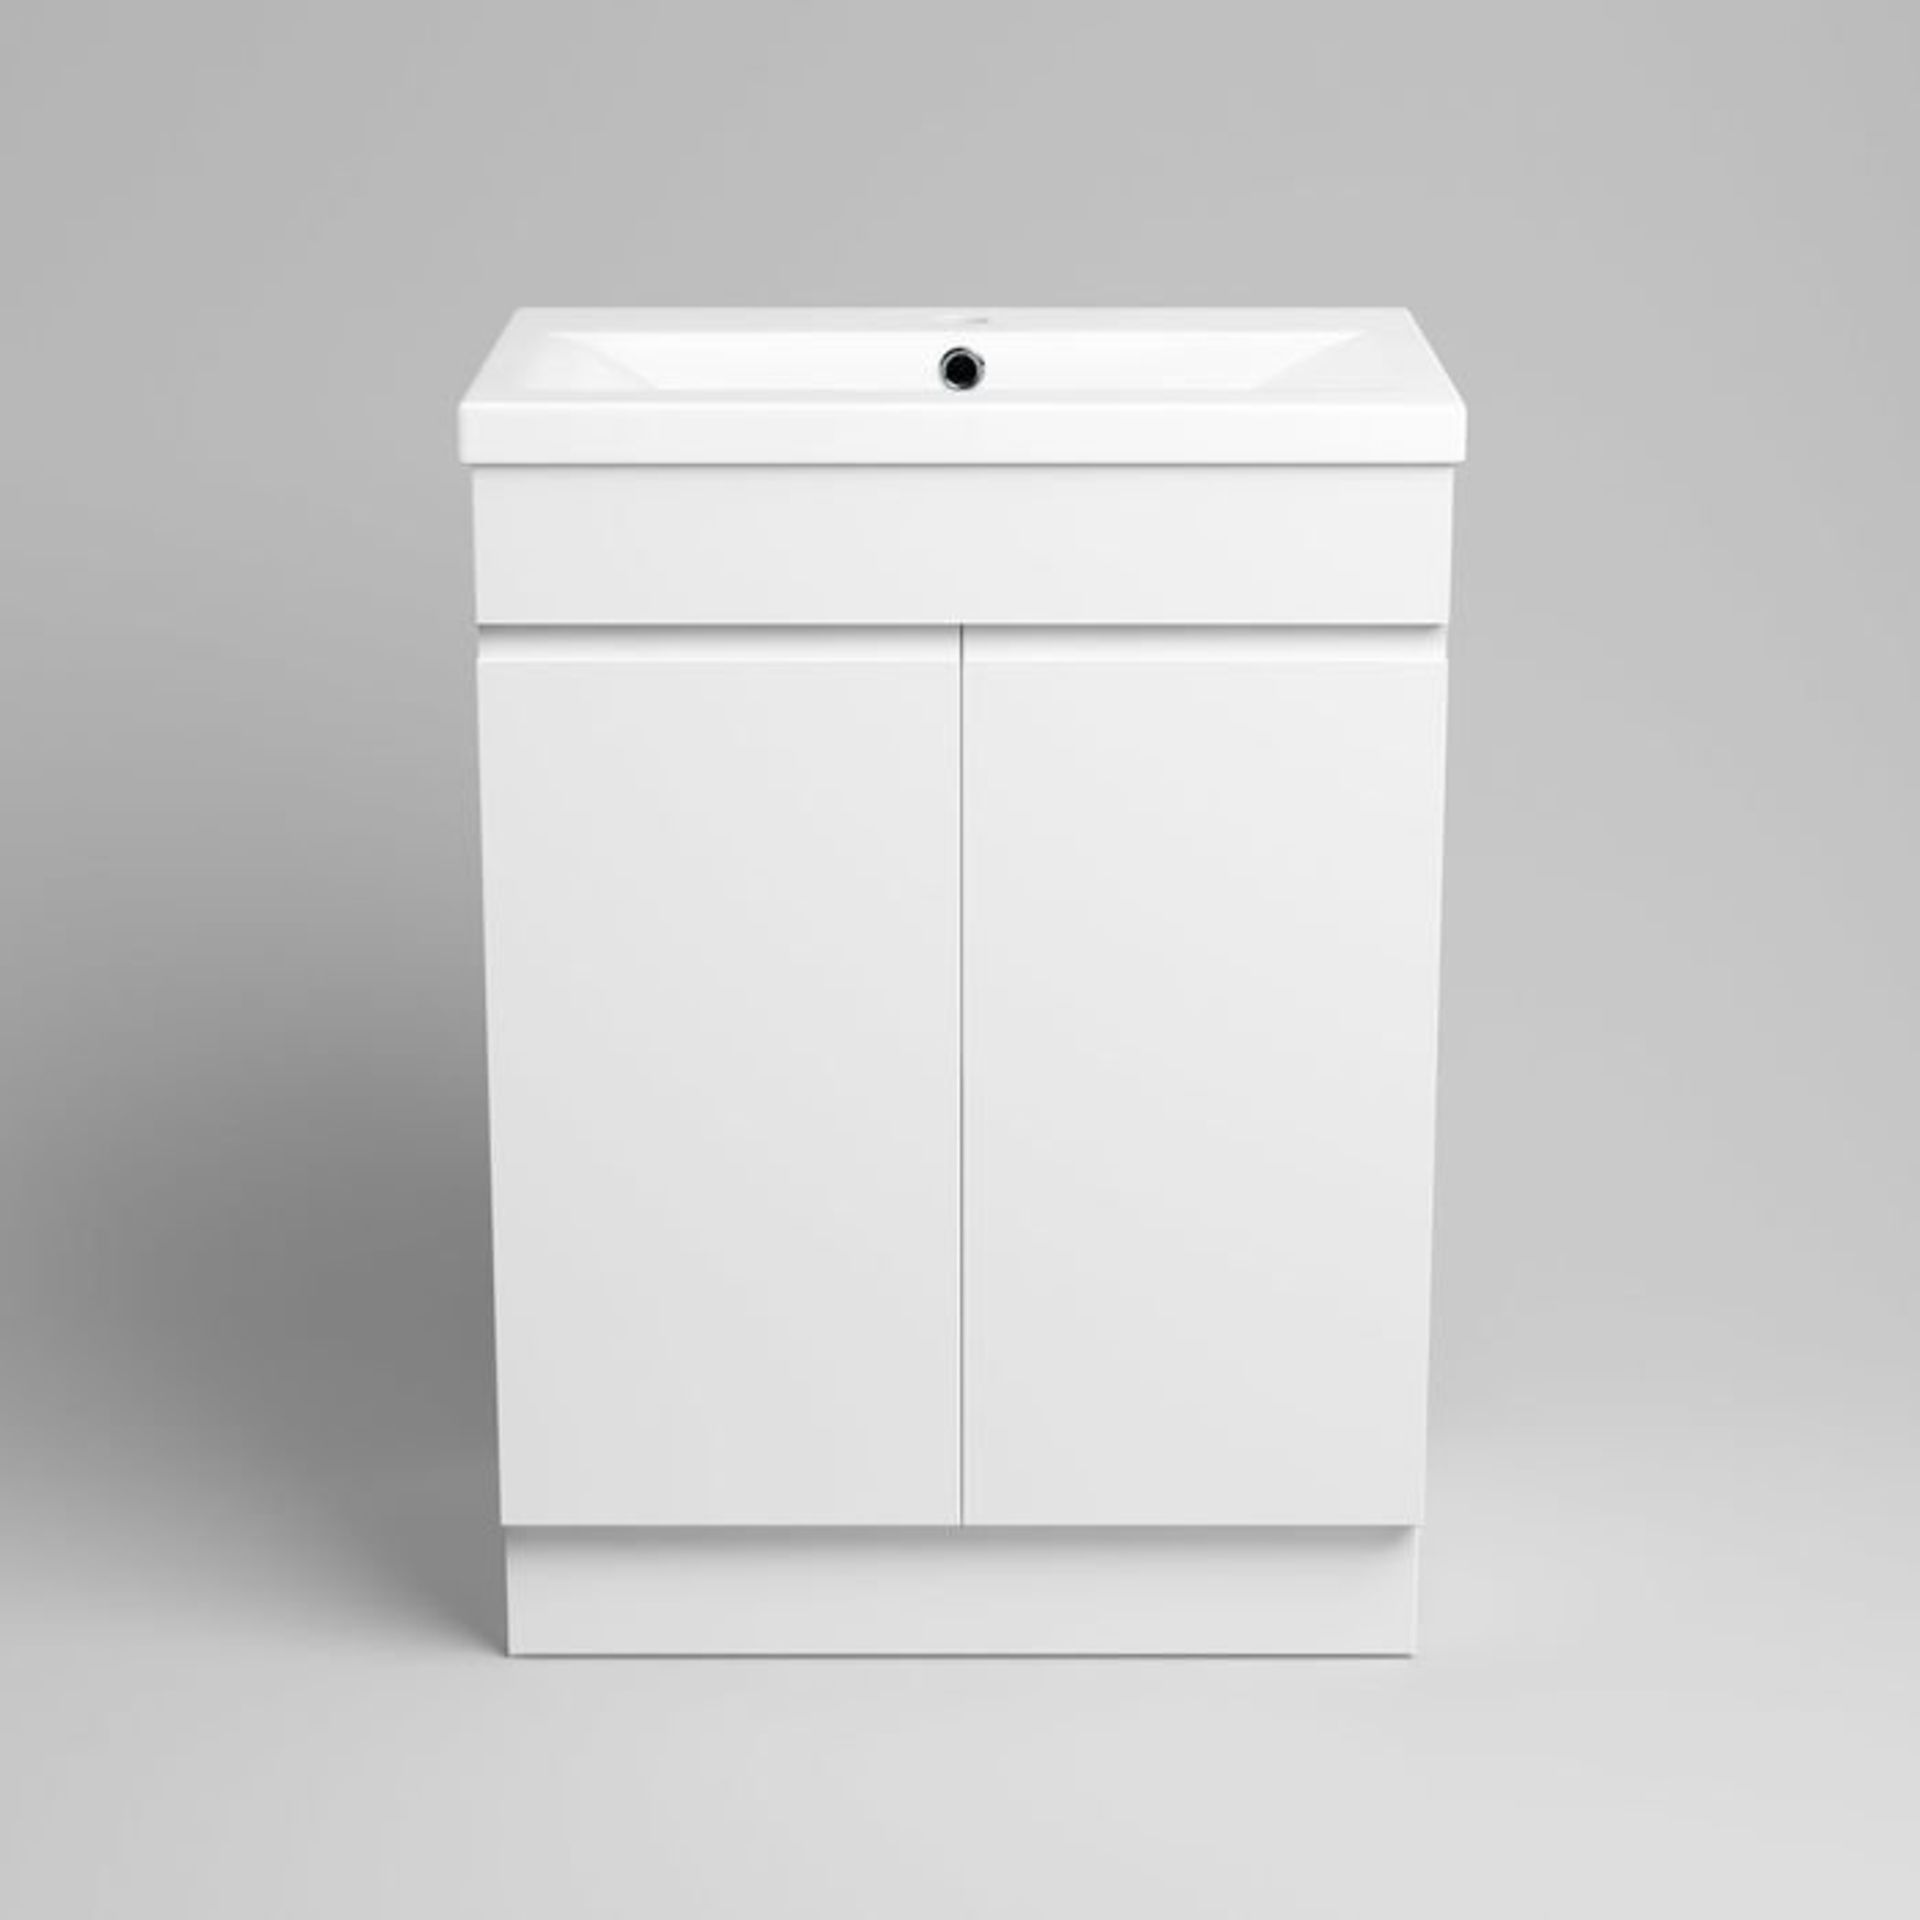 (H21) 600mm Trent High Gloss White Basin Cabinet - Floor Standing RRP £499.99. Includes groove - Image 4 of 4